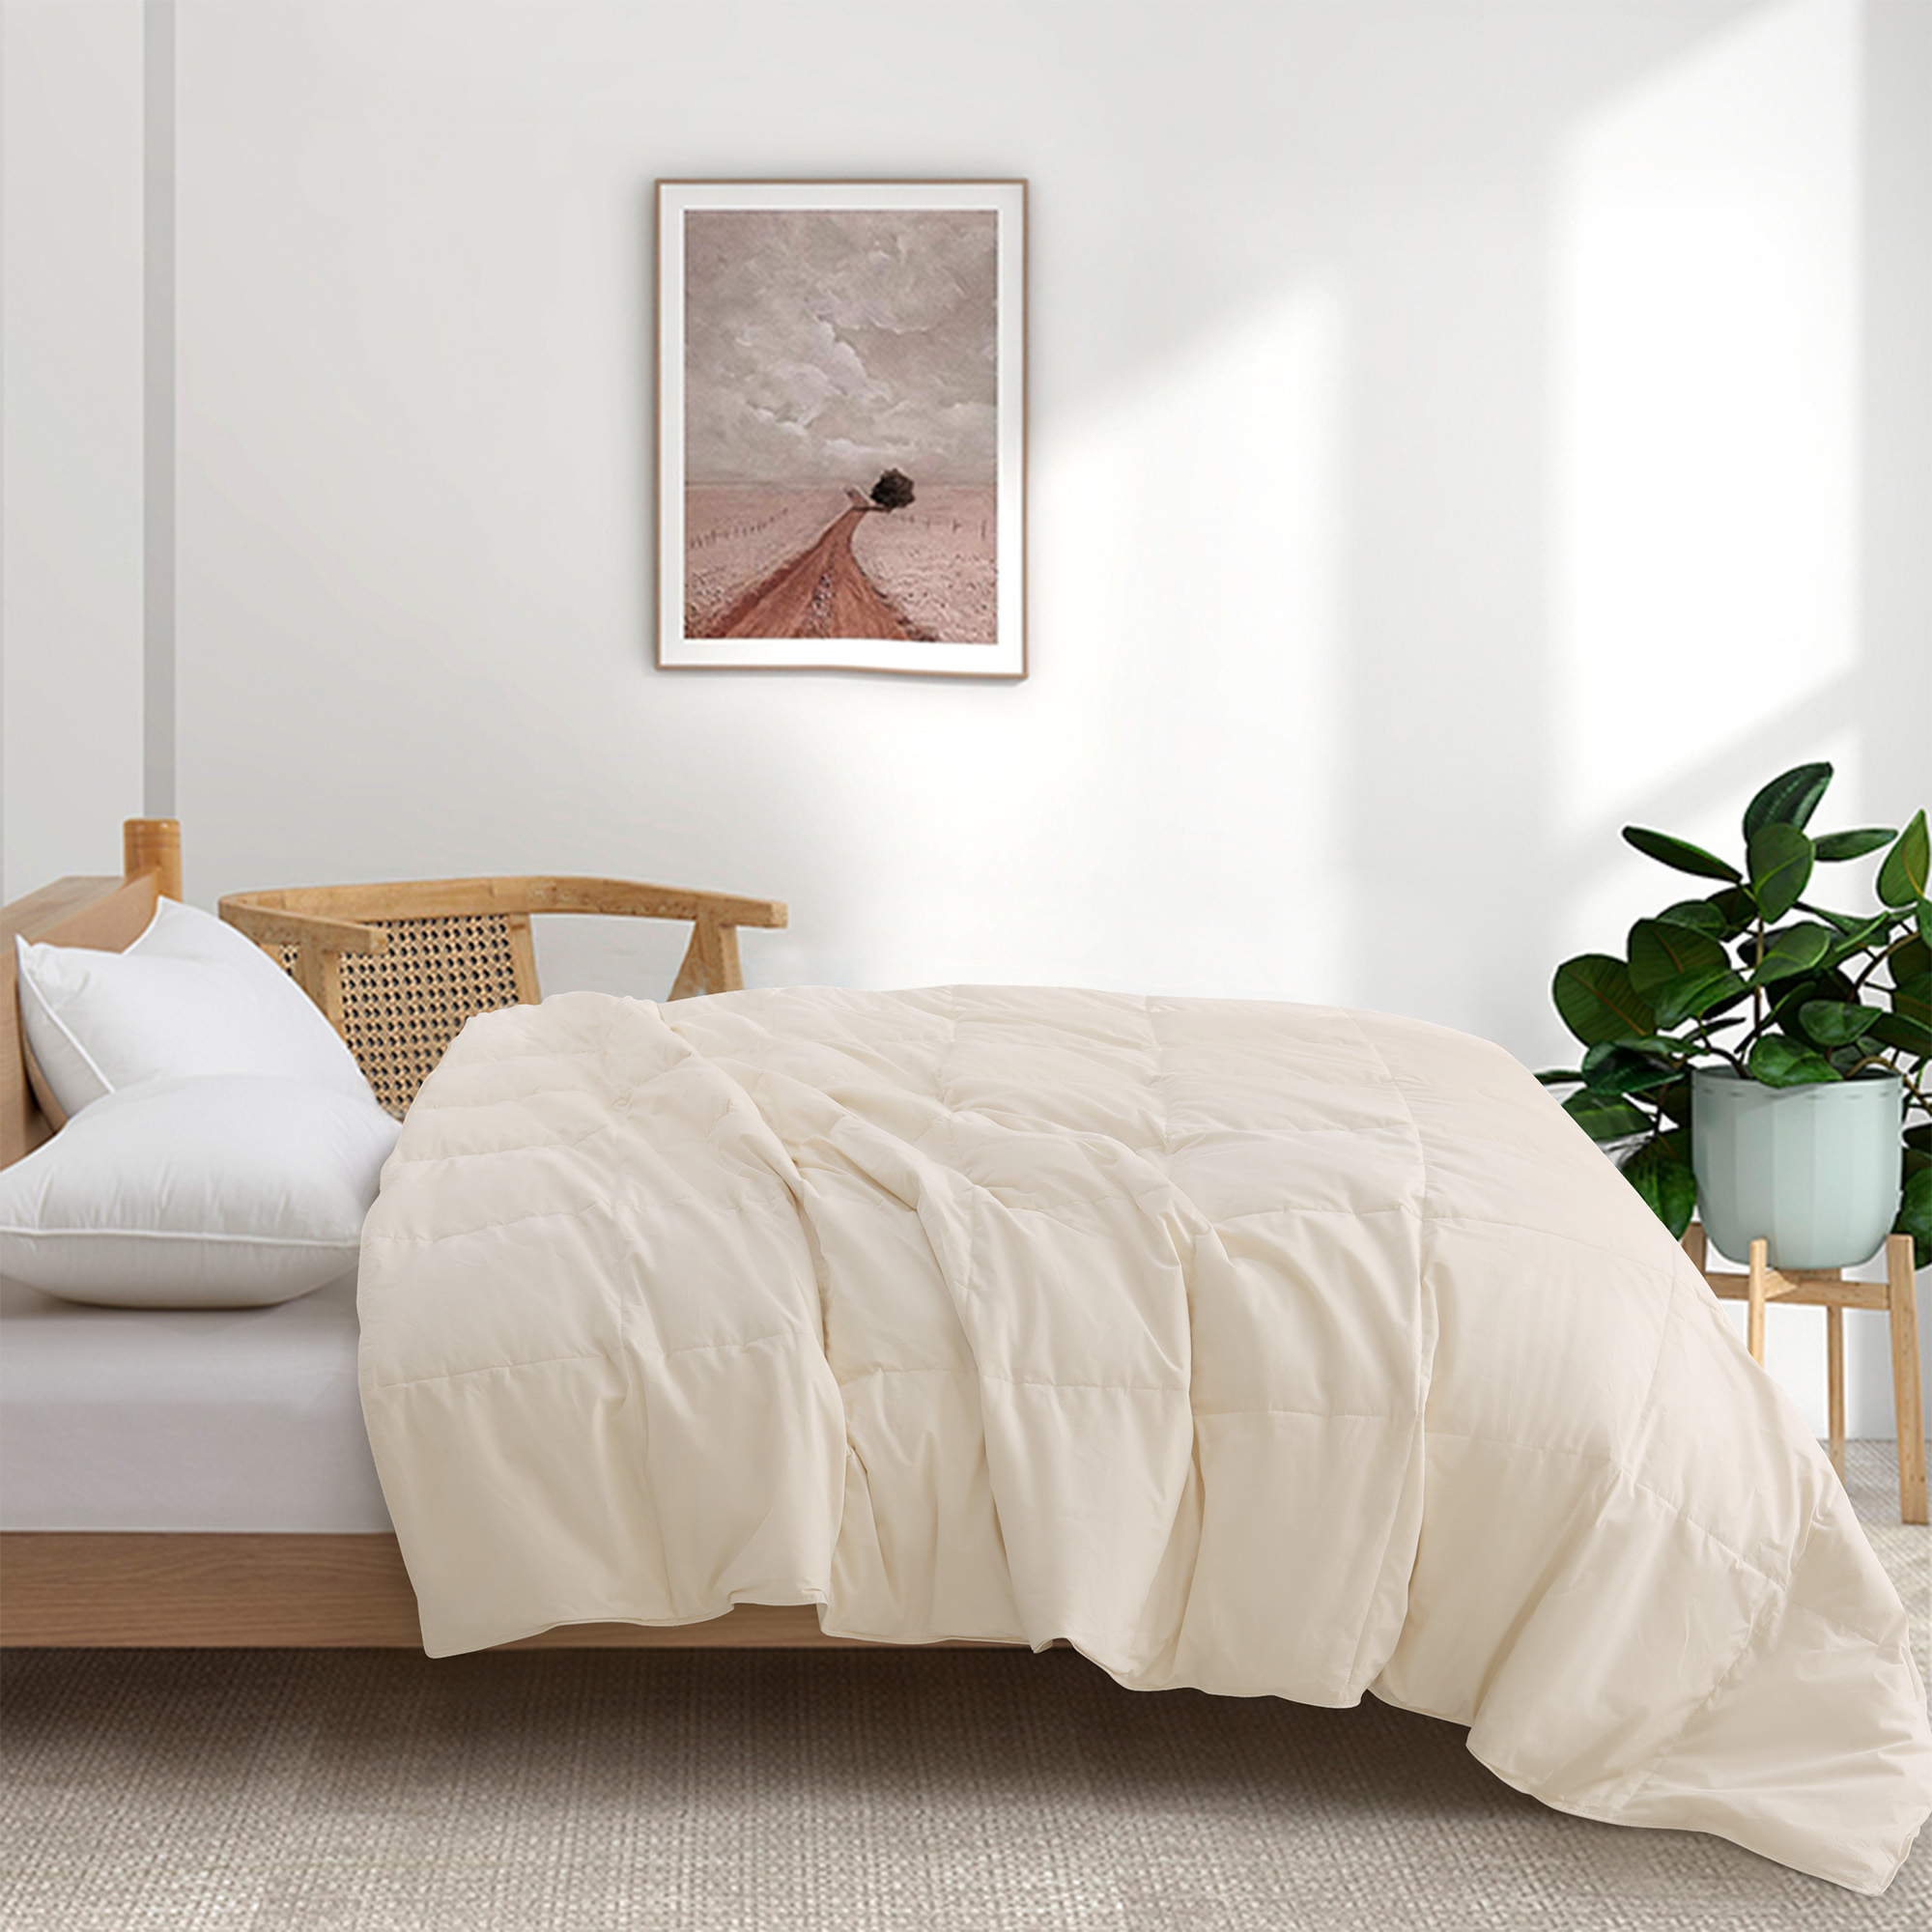 Premium Lightweight Organic Cotton Comforter With Down And Feather Fiber Fill - Perfect For Summer - Full/Queen